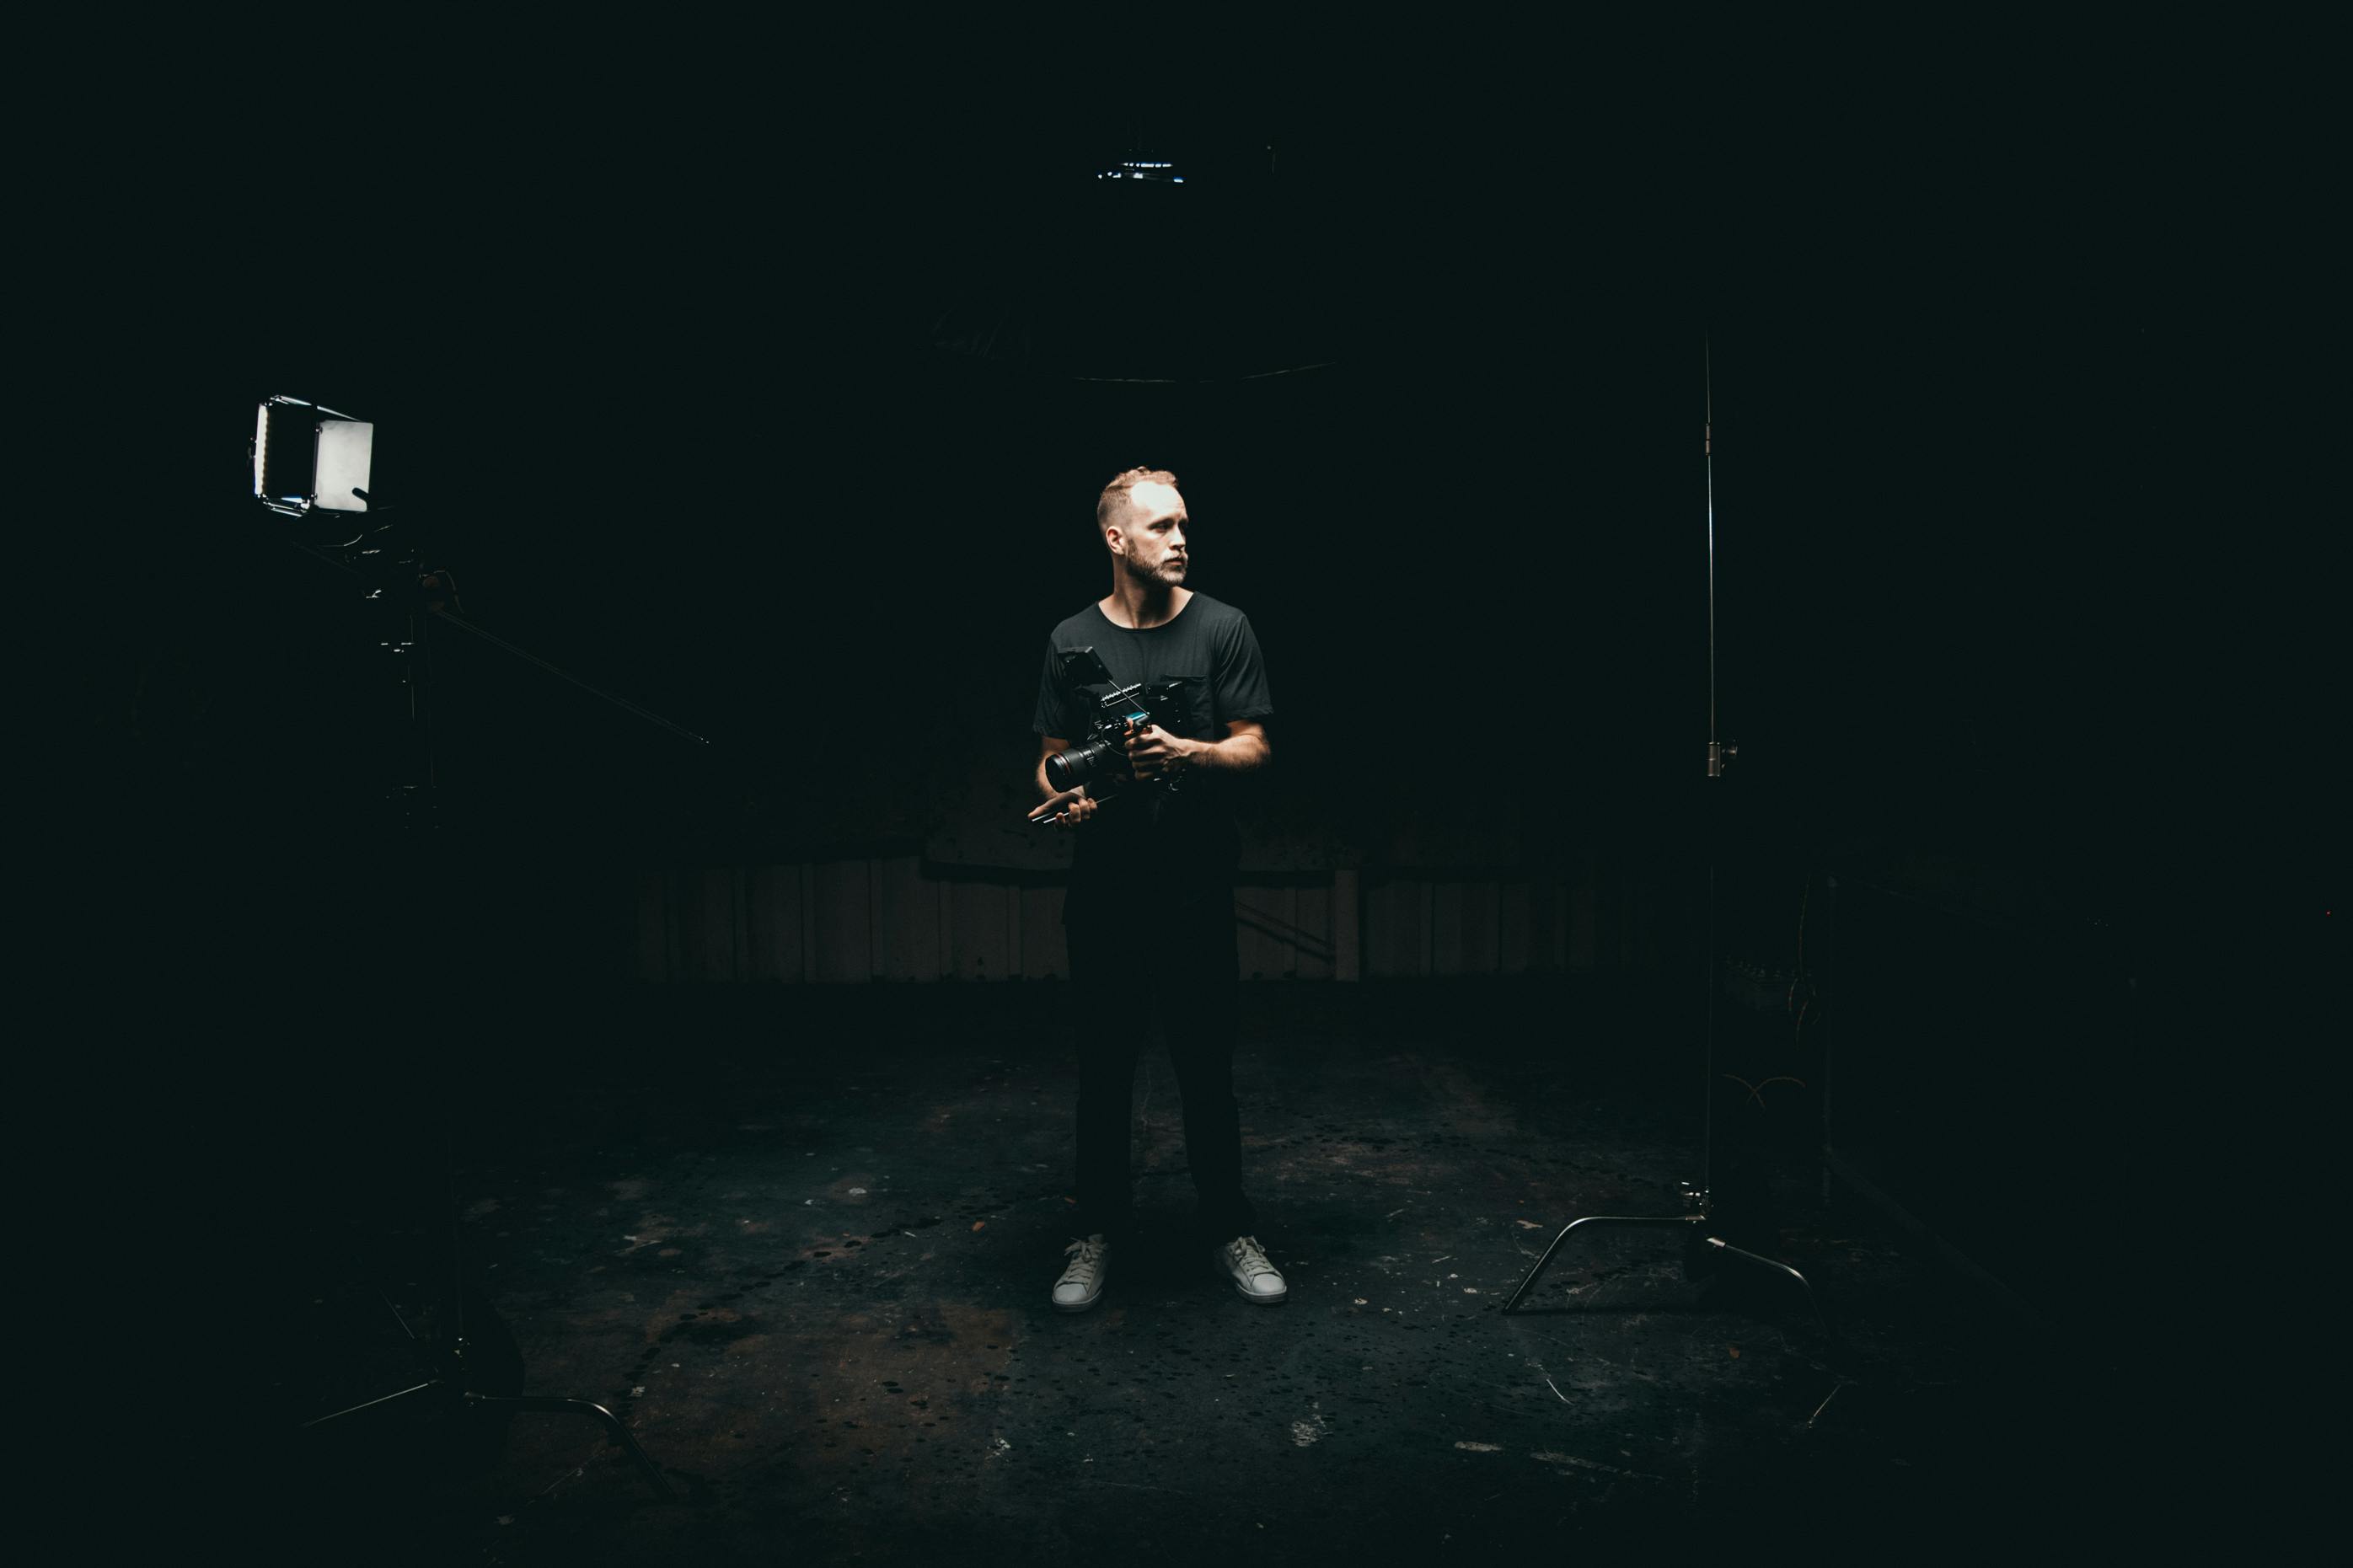 man standing in the middle of a dark room